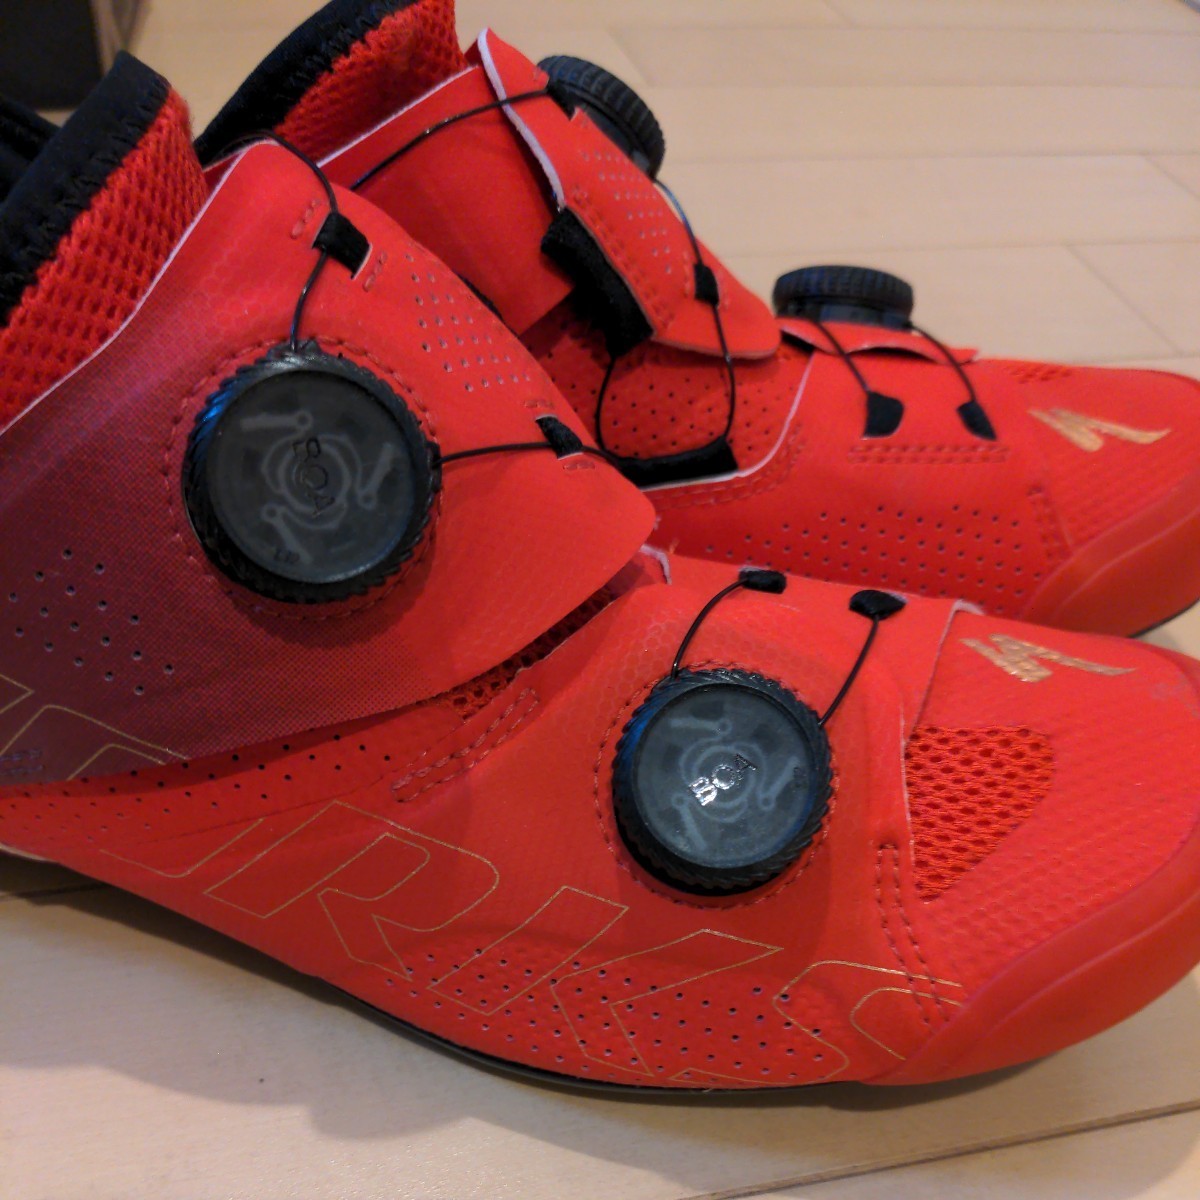 S-WORKS ARES ROAD SHOES 39.0の画像4